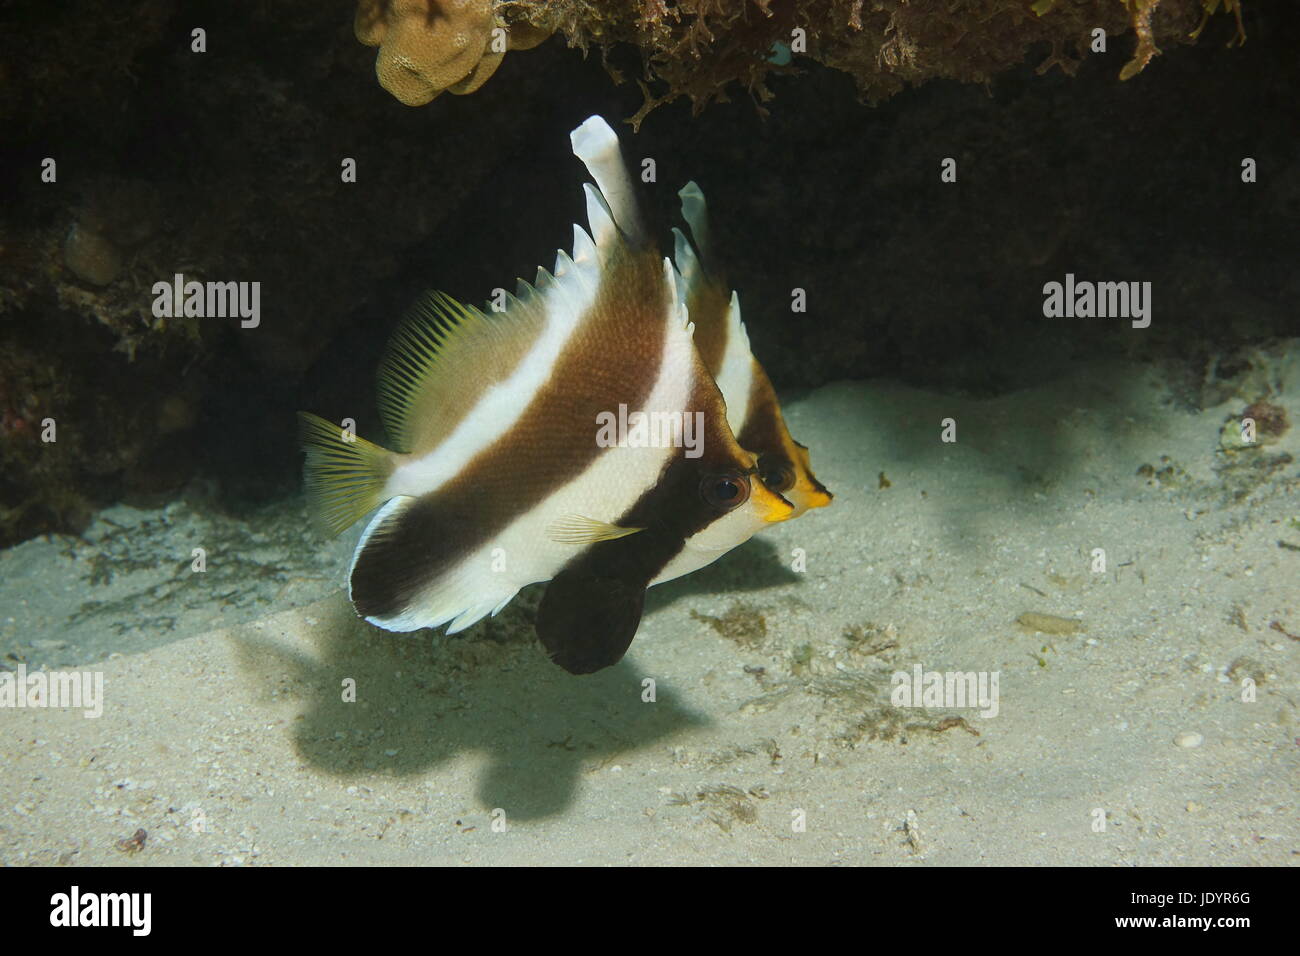 Tropical fish Heniochus chrysostomus, commonly called threeband pennantfish or pennant bannerfish, underwater, Pacific ocean, French Polynesia Stock Photo